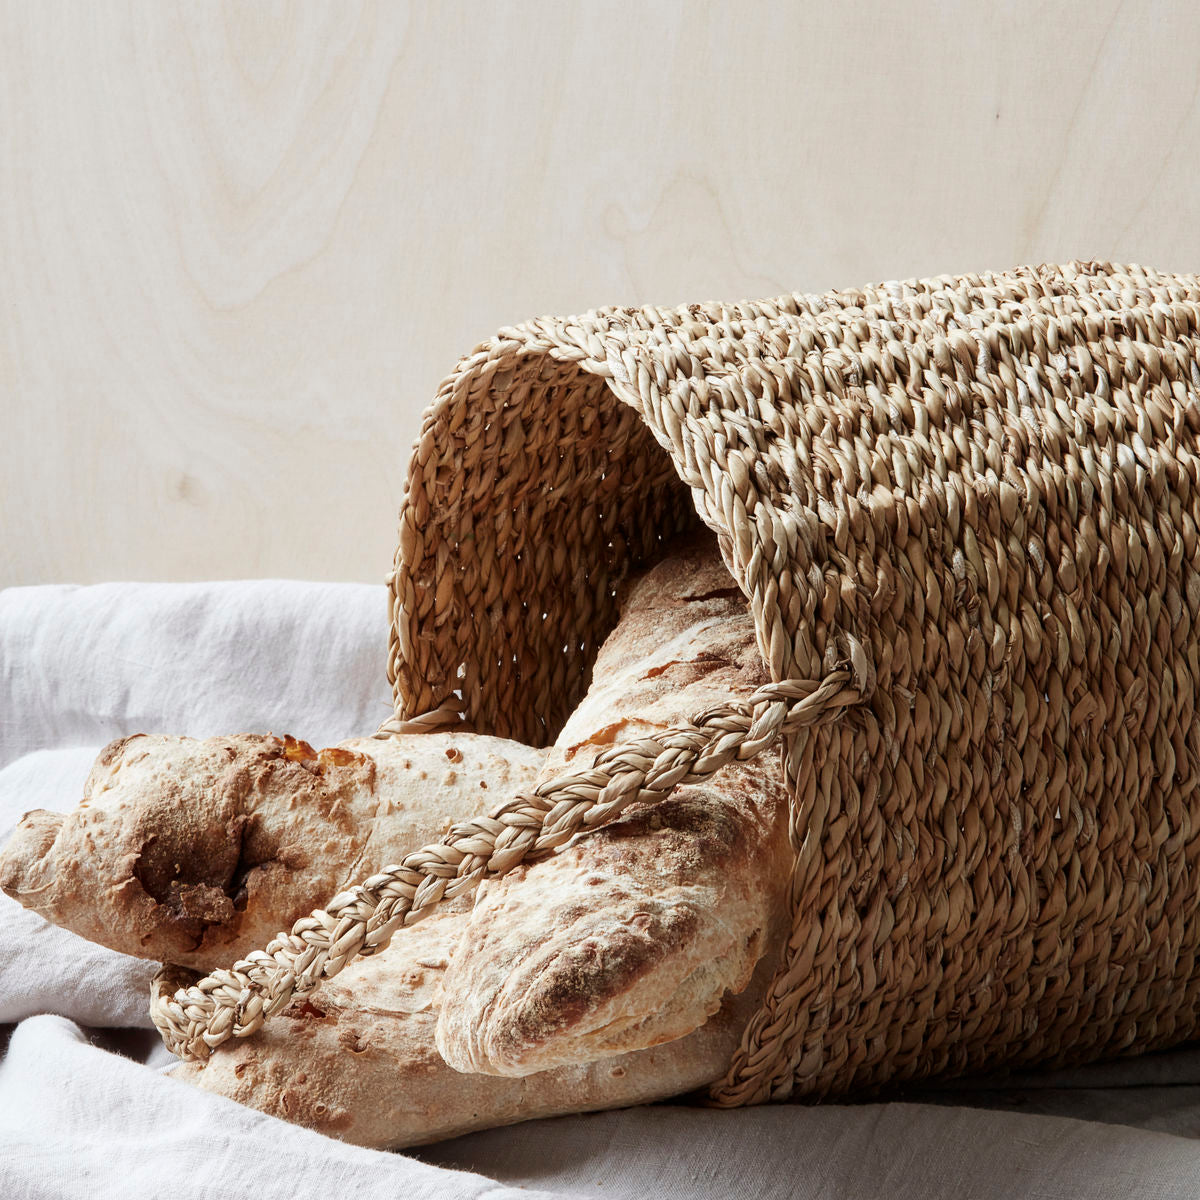 Basket with Handle with bread